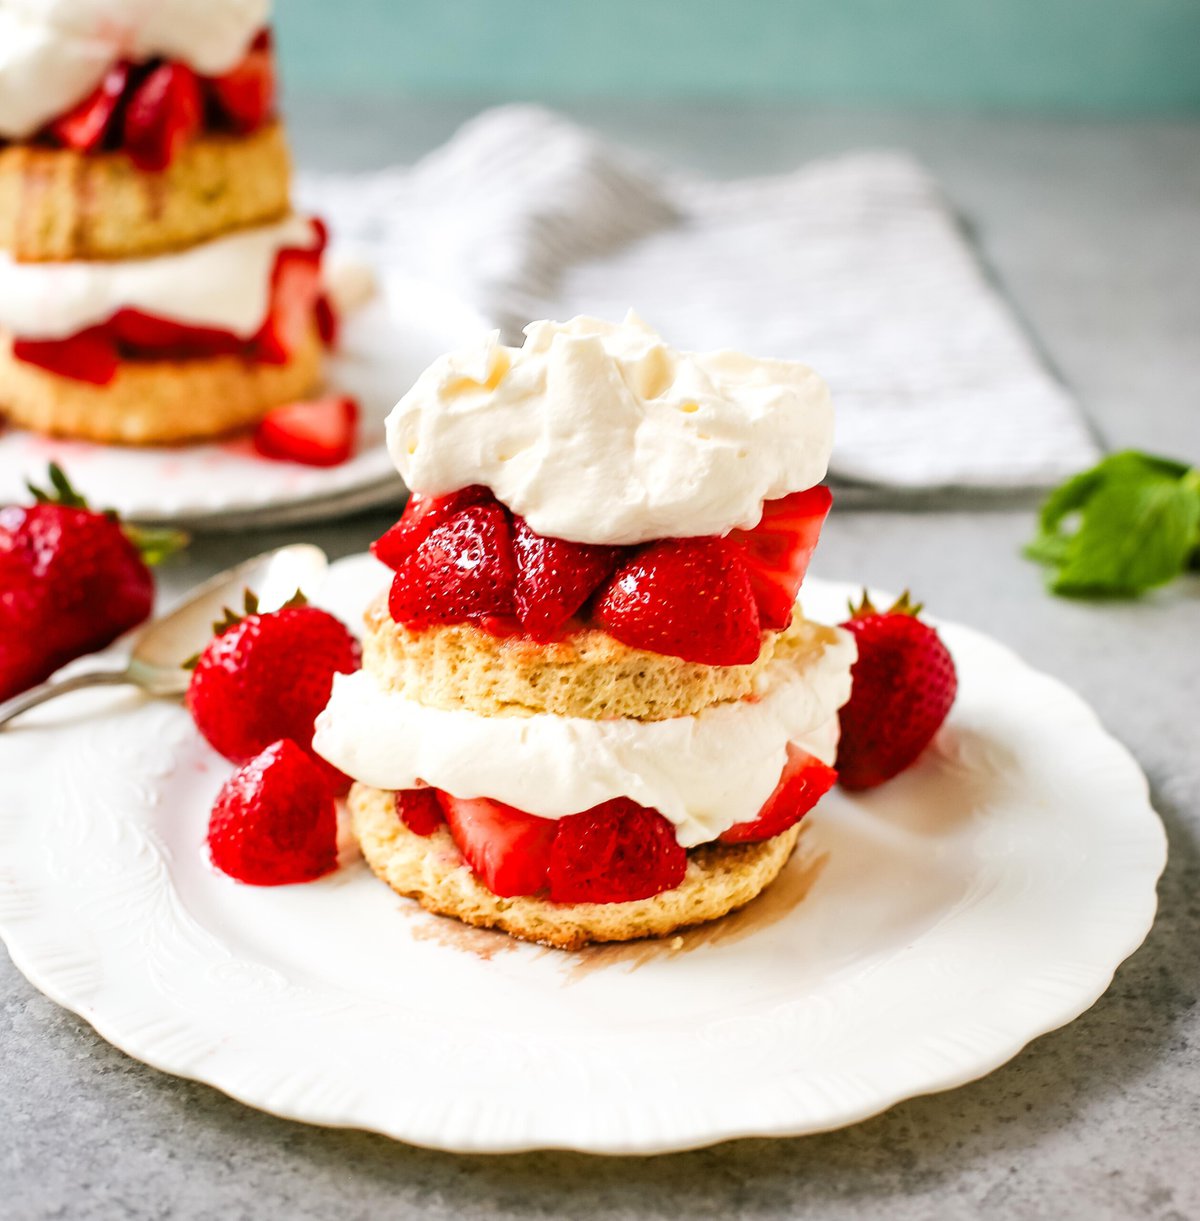 The Best Strawberry Shortcake with Homemade Sweet Biscuits, Sliced Strawberries, and Sweetened Whipped Cream. The sweet biscuits paired with sugared, syrupy strawberries, and fluffy whipped cream. 